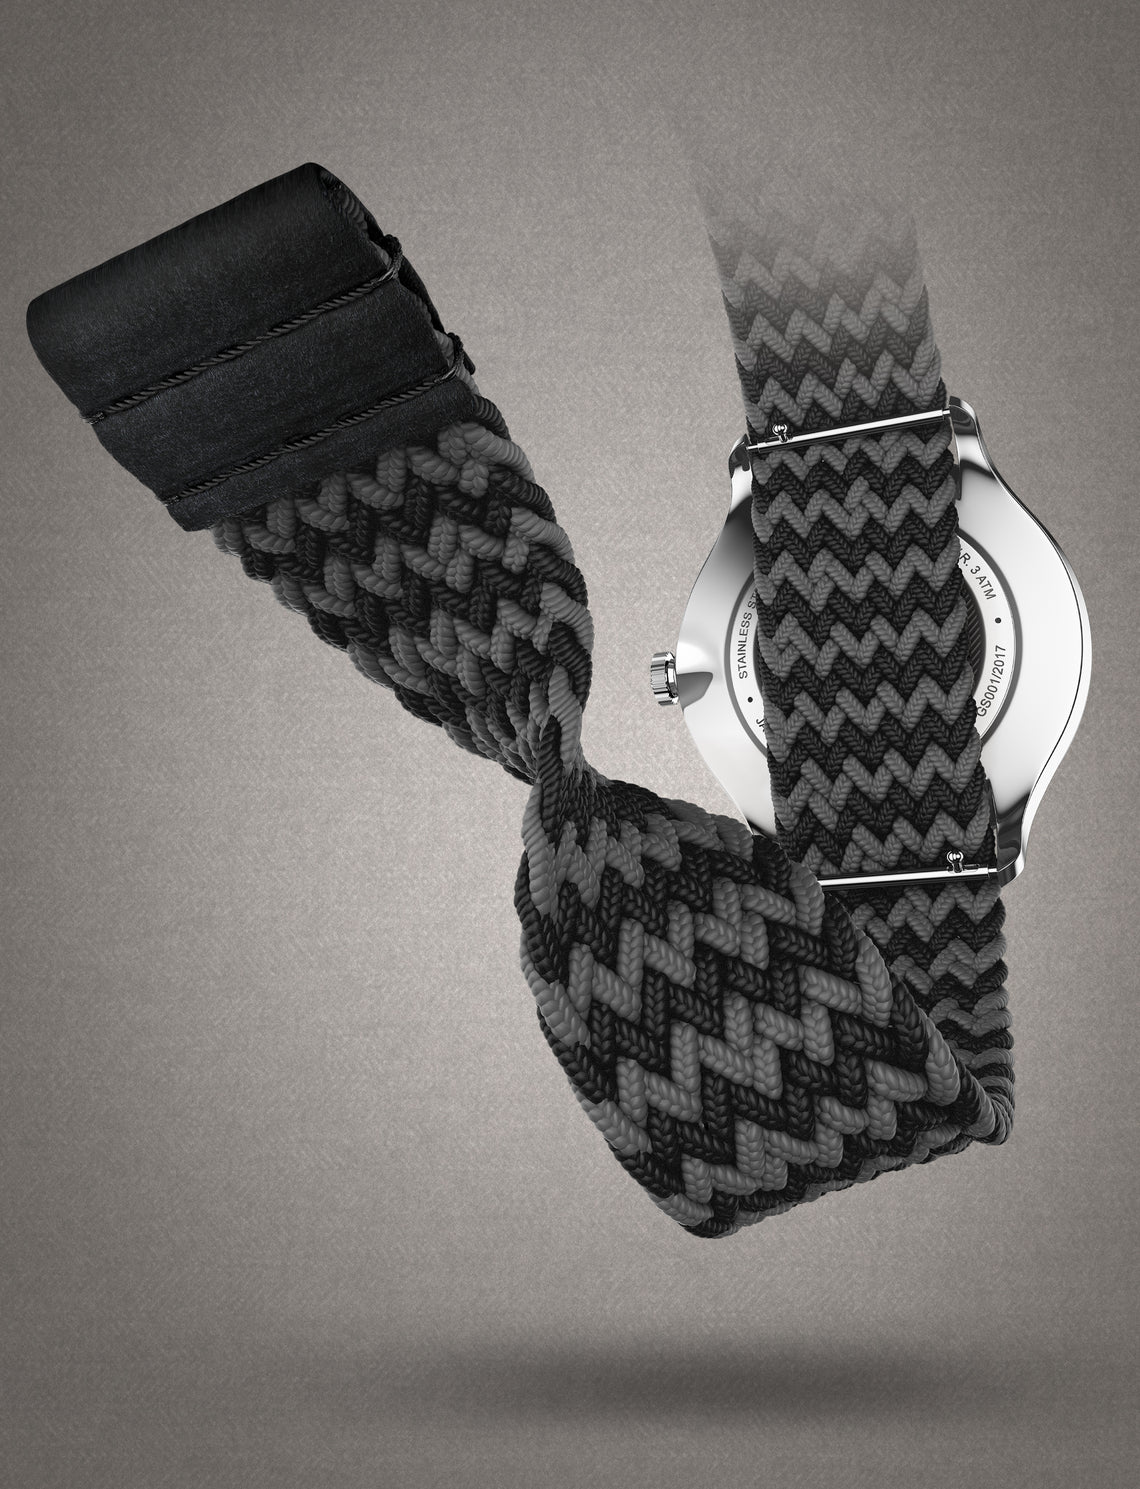 Time to be charmed: Tweed Co. watches set the trend in style